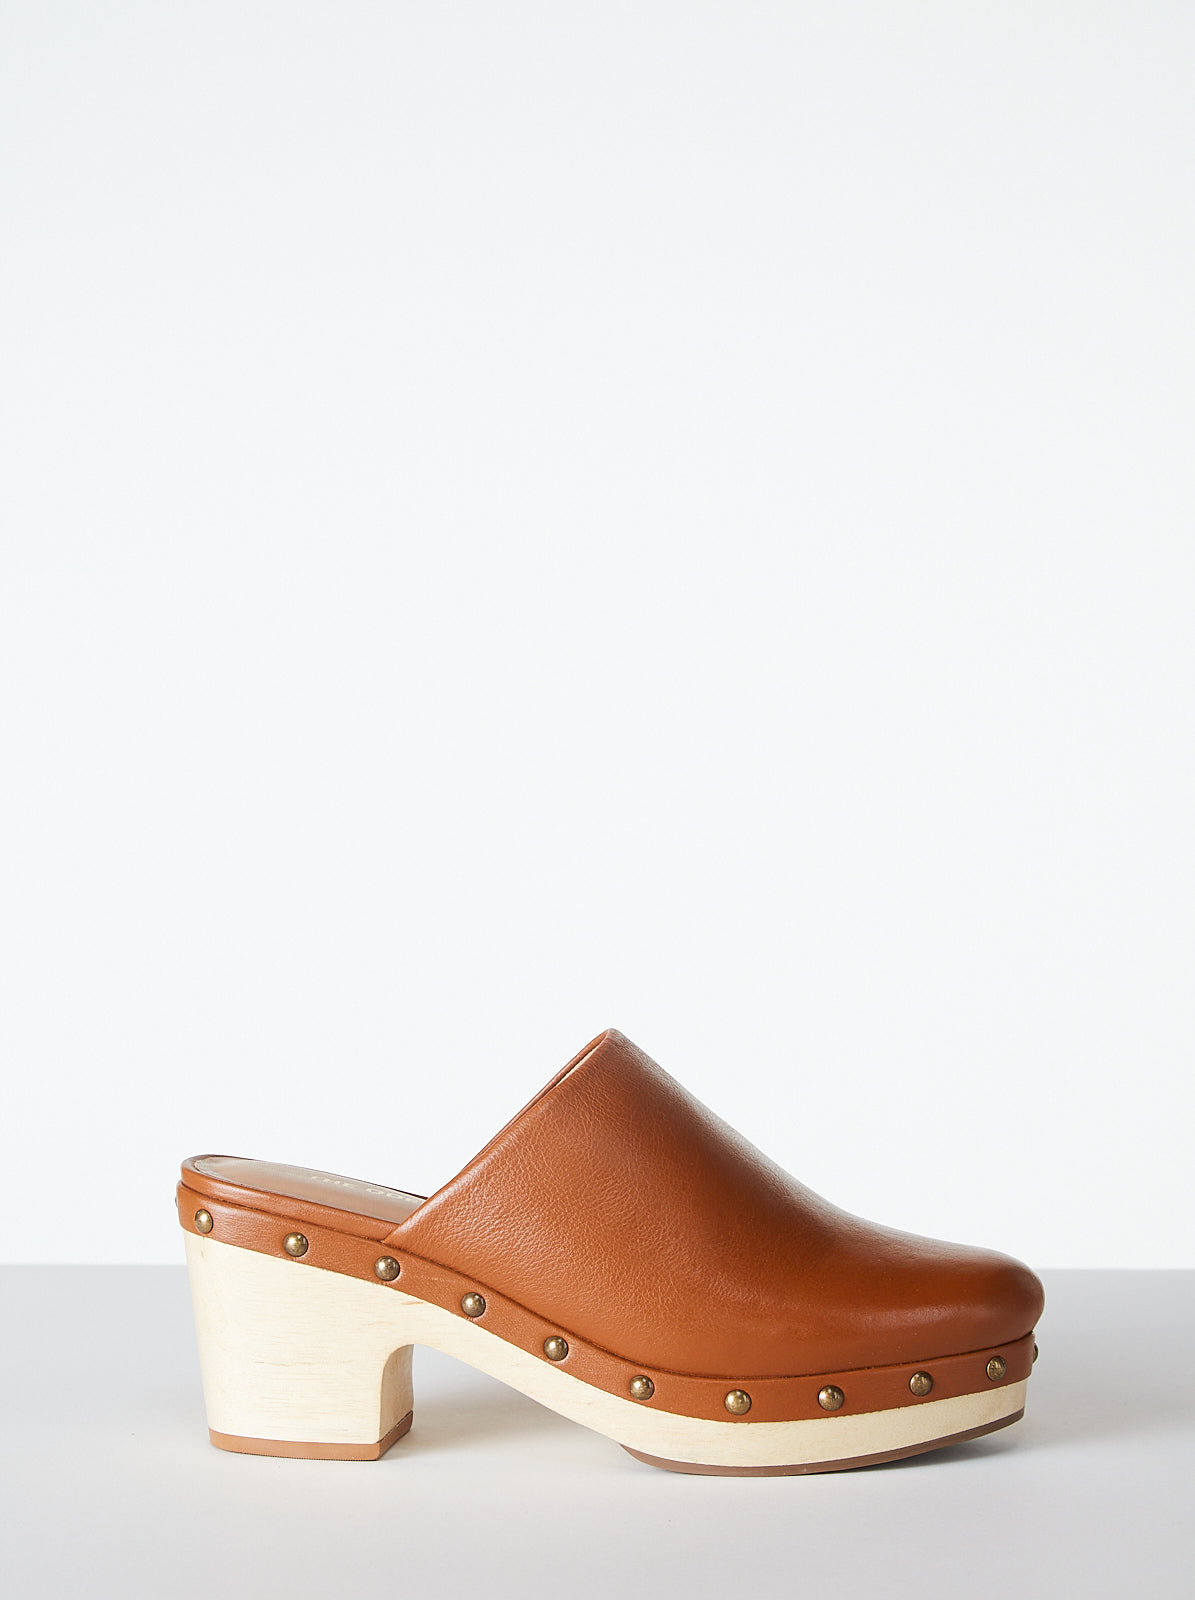 THE ODELLS: Leather Clog